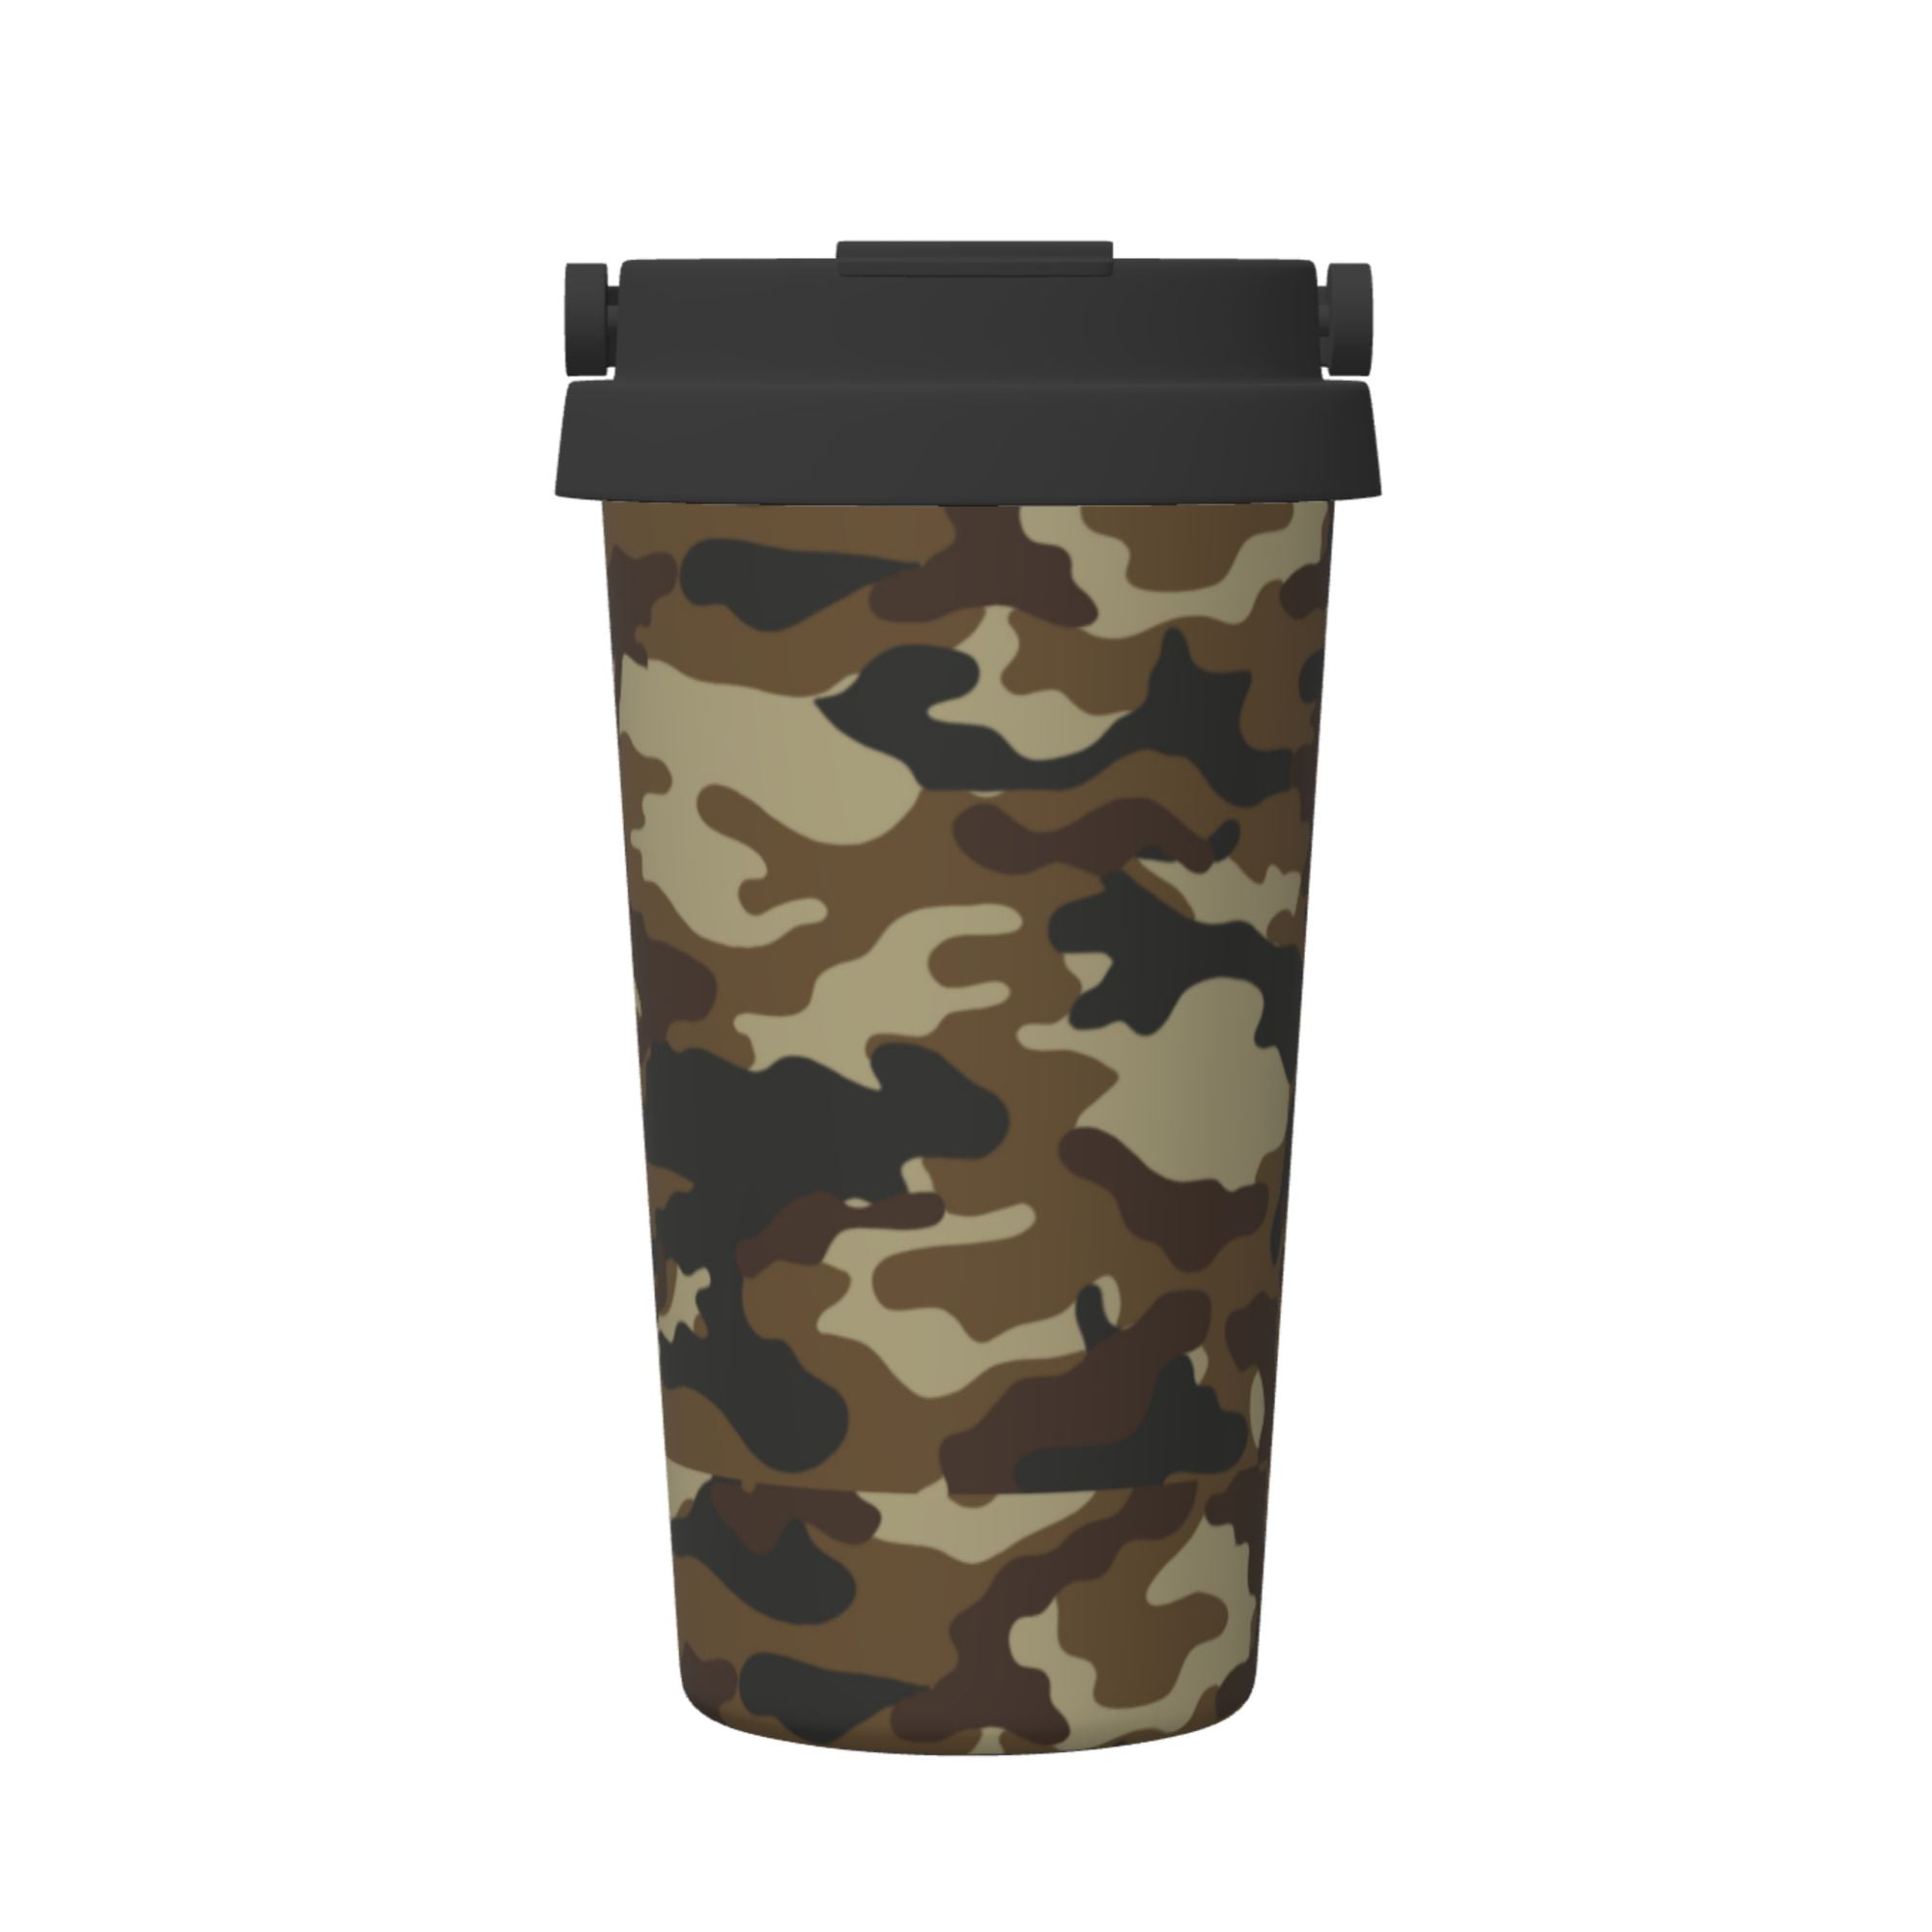 Ceovfoi 40 oz Camo Tumbler with Handle Lid and Straw, Hunting Gifts for Men  Women,Camo Tumbler Travel Coffee Cup Mug Water Botter